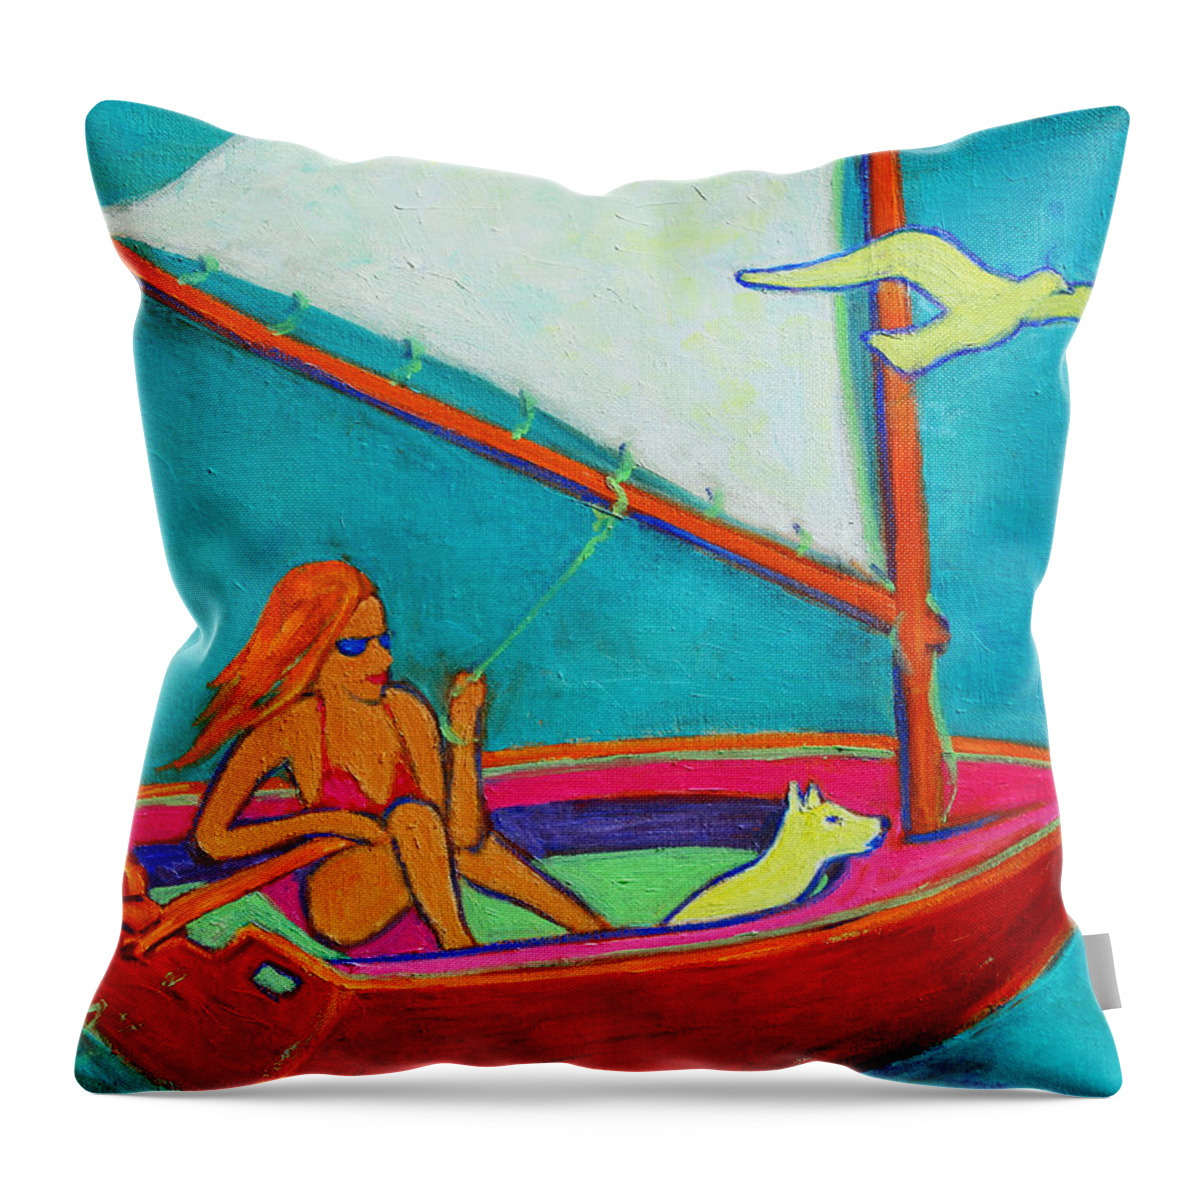 Pop Art Throw Pillow featuring the painting Wind Beneath My Wings I by Xueling Zou